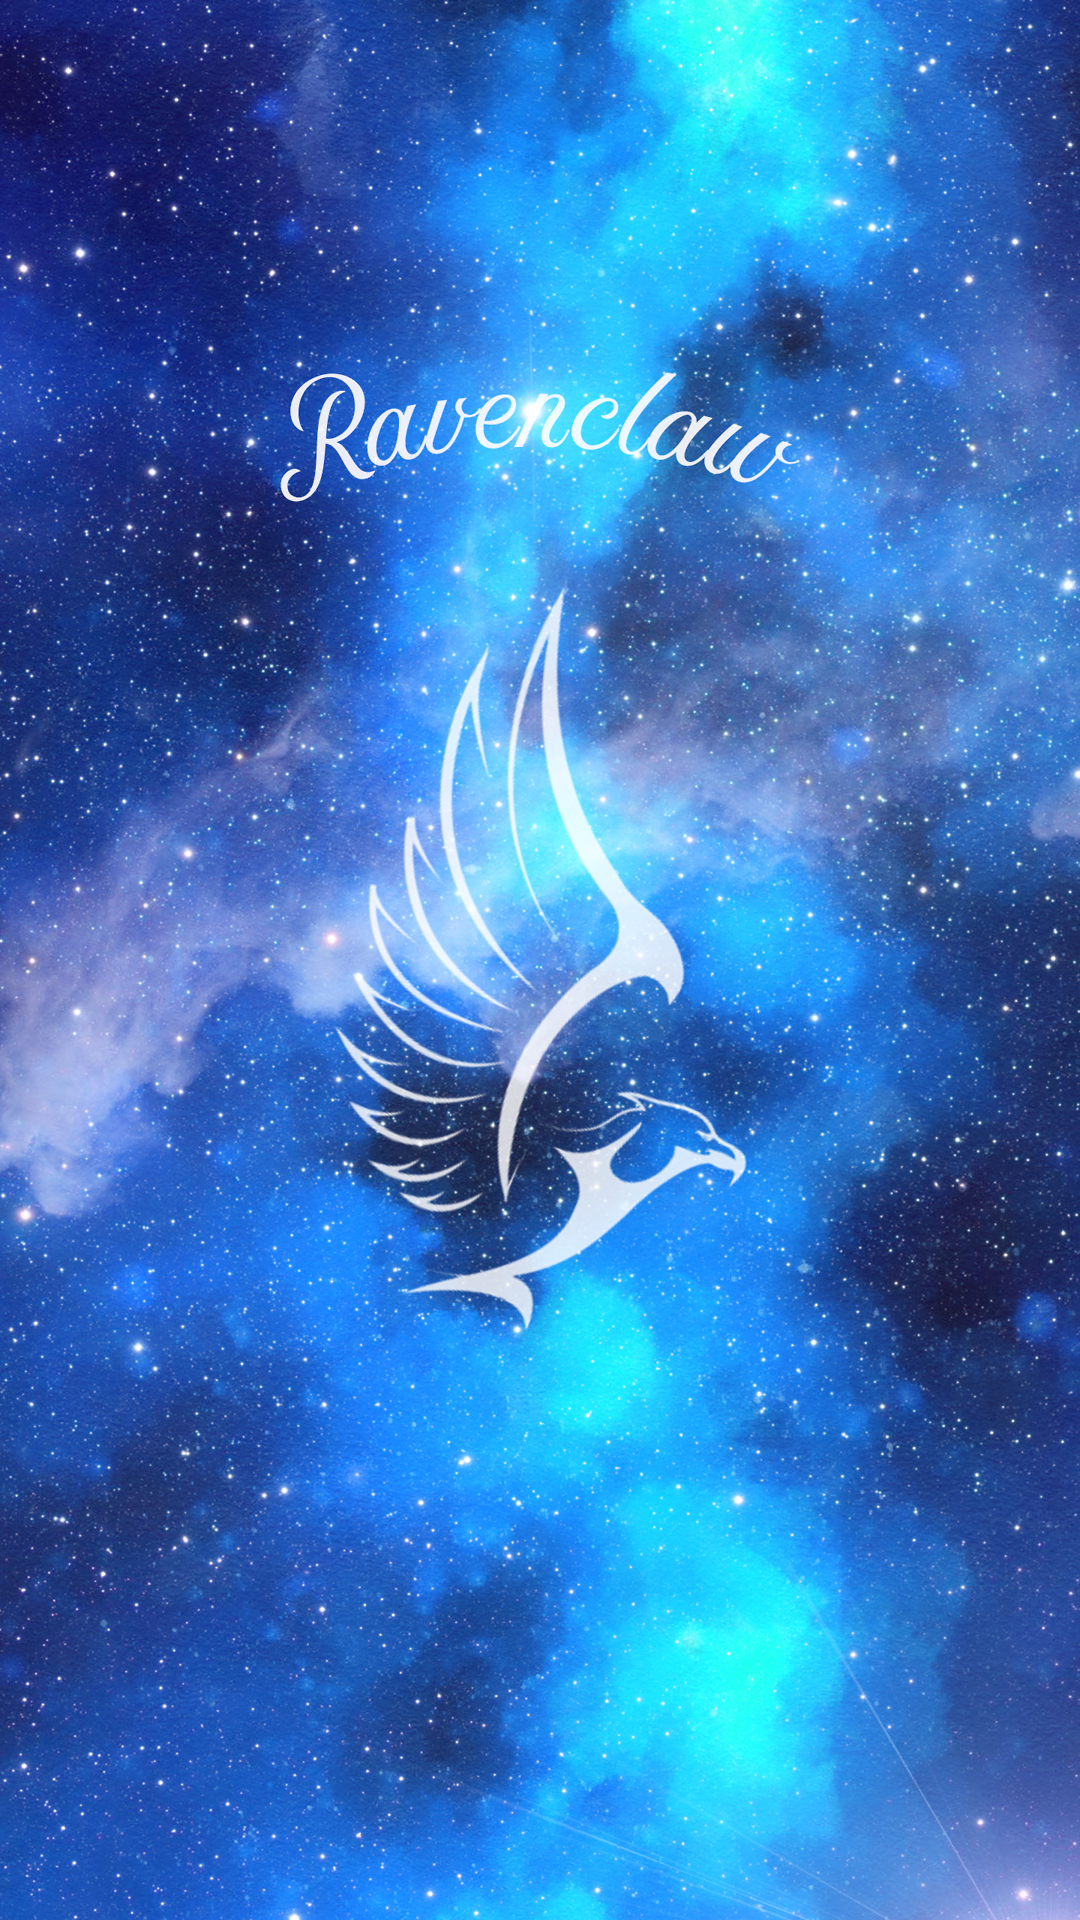 harry potter ravenclaw wallpaper,sky,atmosphere,wing,space,illustration